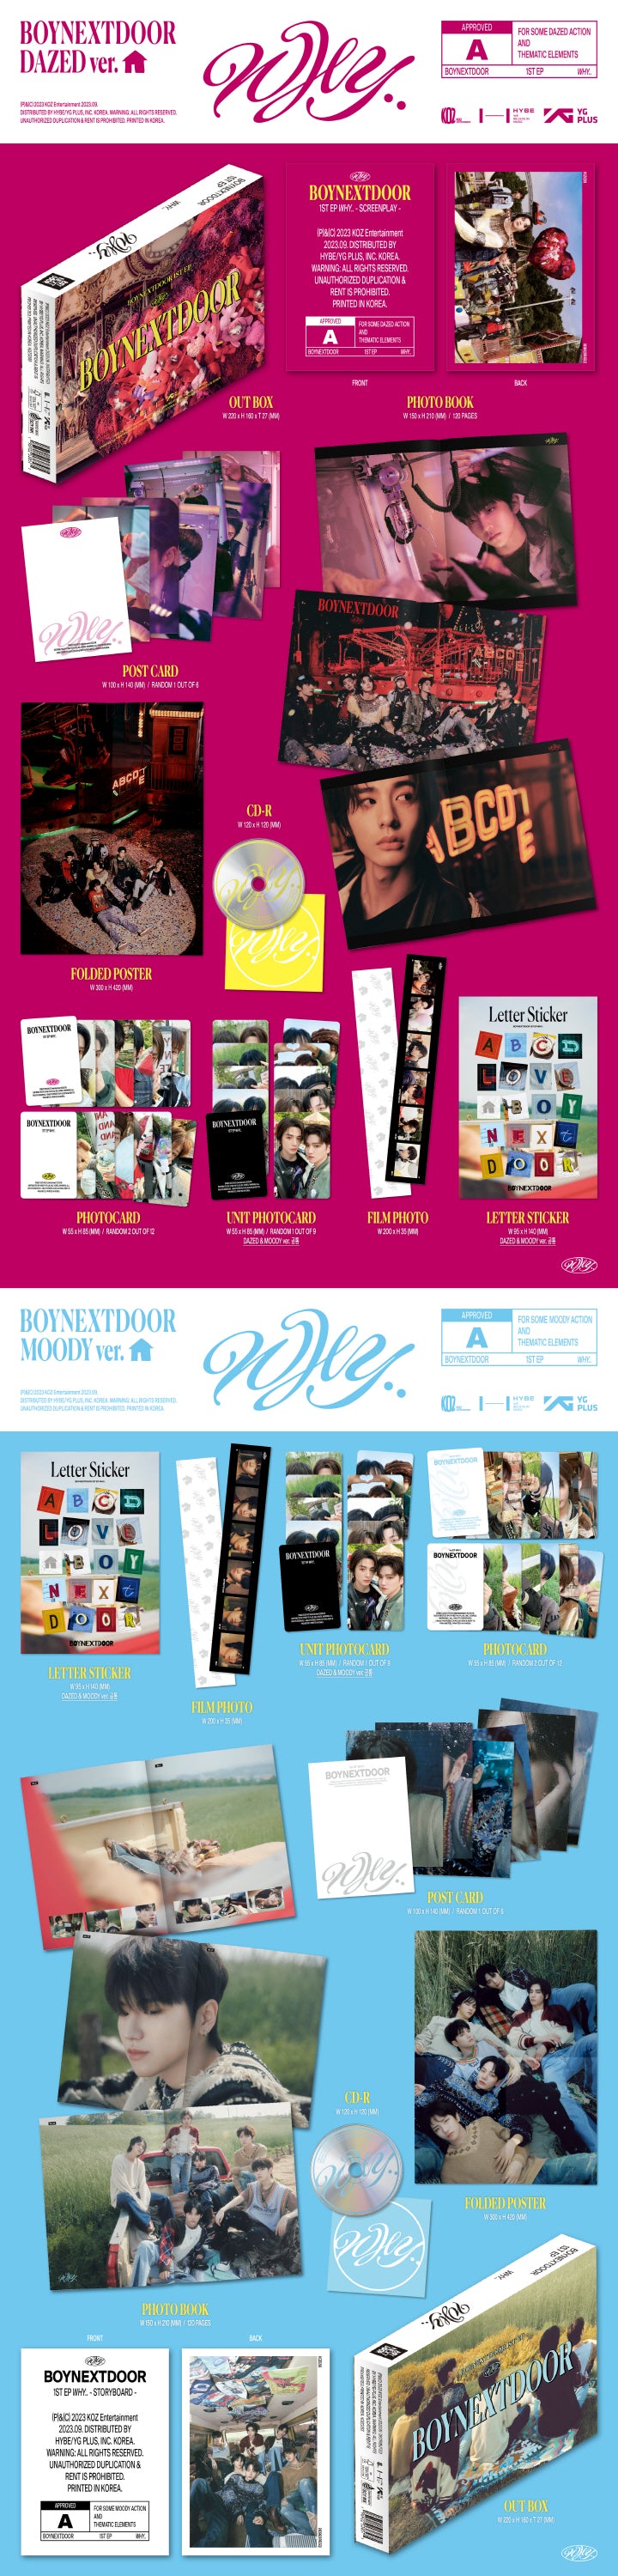 1 CD
1 Photo Book
1 Postcard (random out of 6 types)
1 Folded Poster
2 Photo Cards (random out of 2 types)
1 Unit Photo Ca...